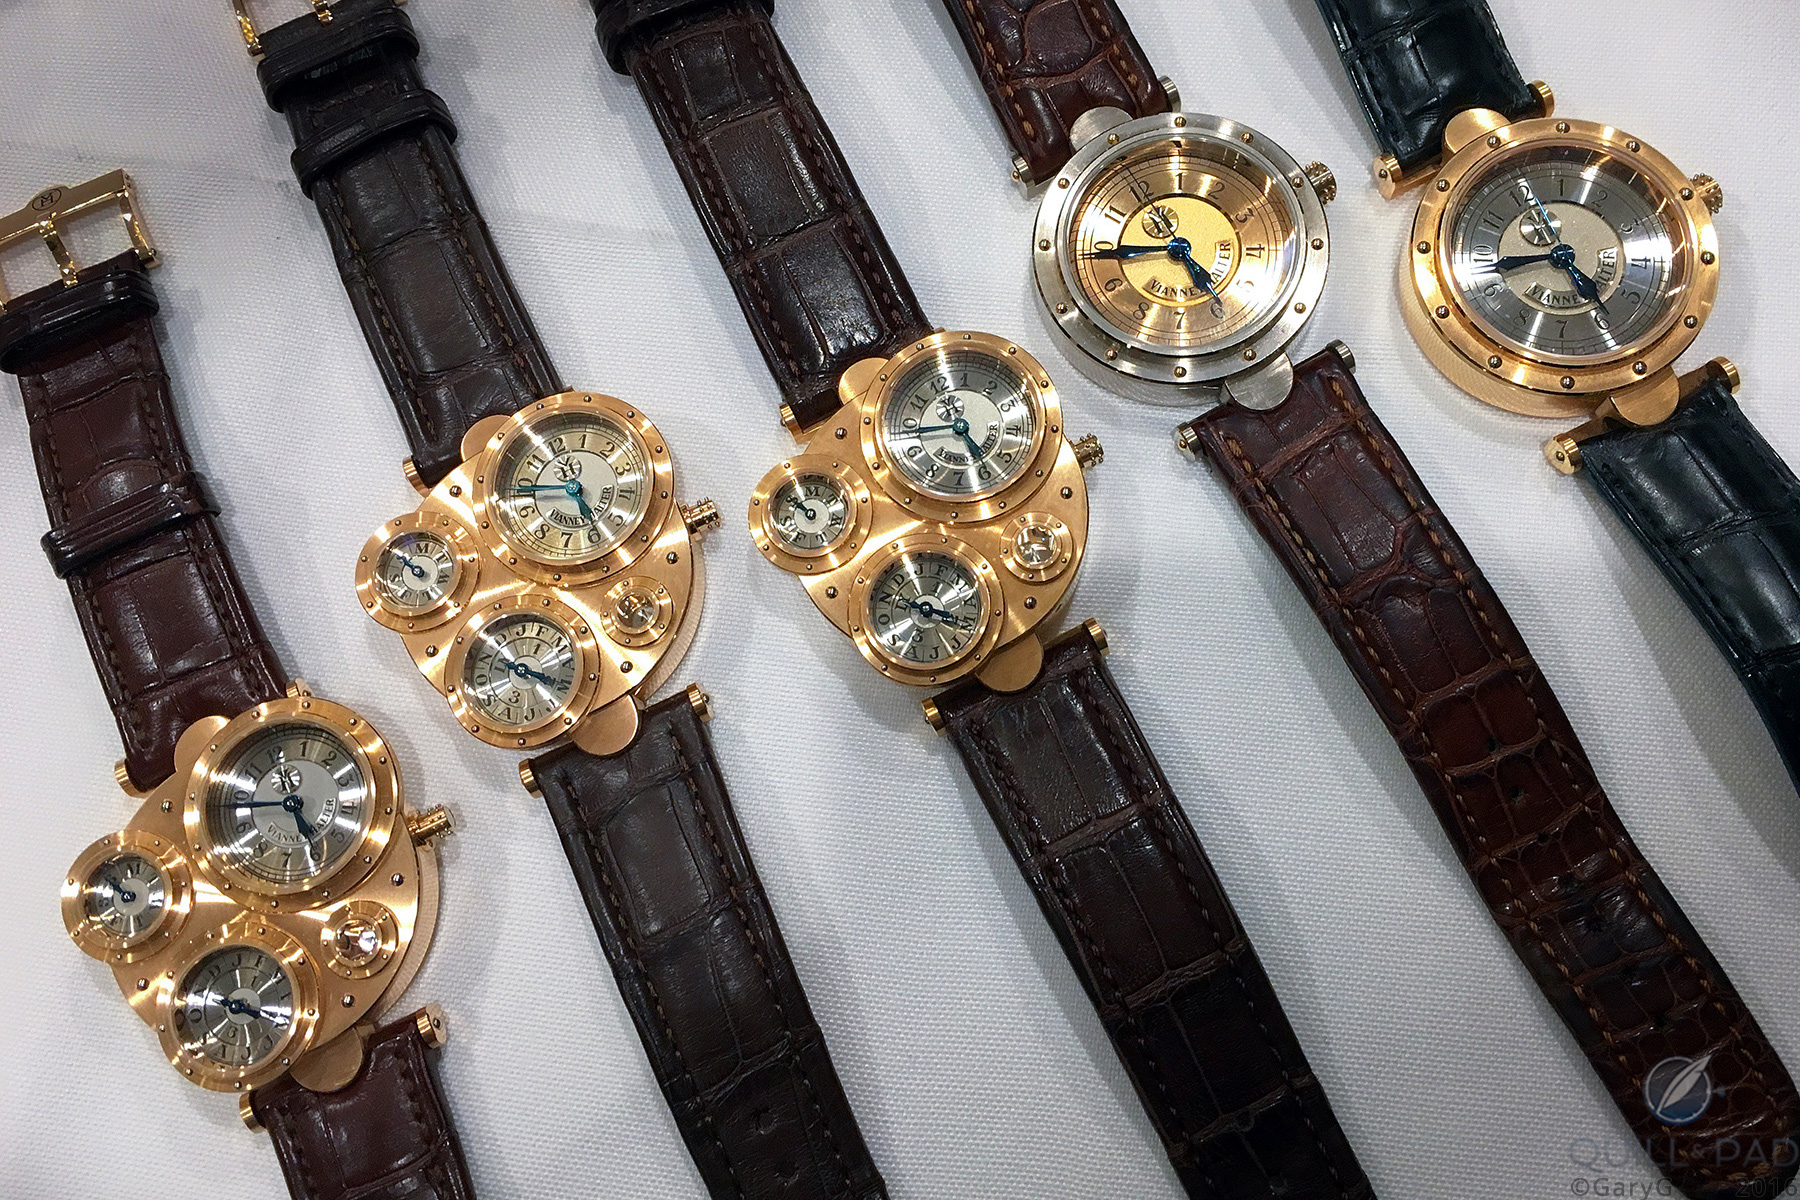 Table scene at a recent watch replica dinner, including three of the 36 Vianney Halter Antiquas made in pink gold